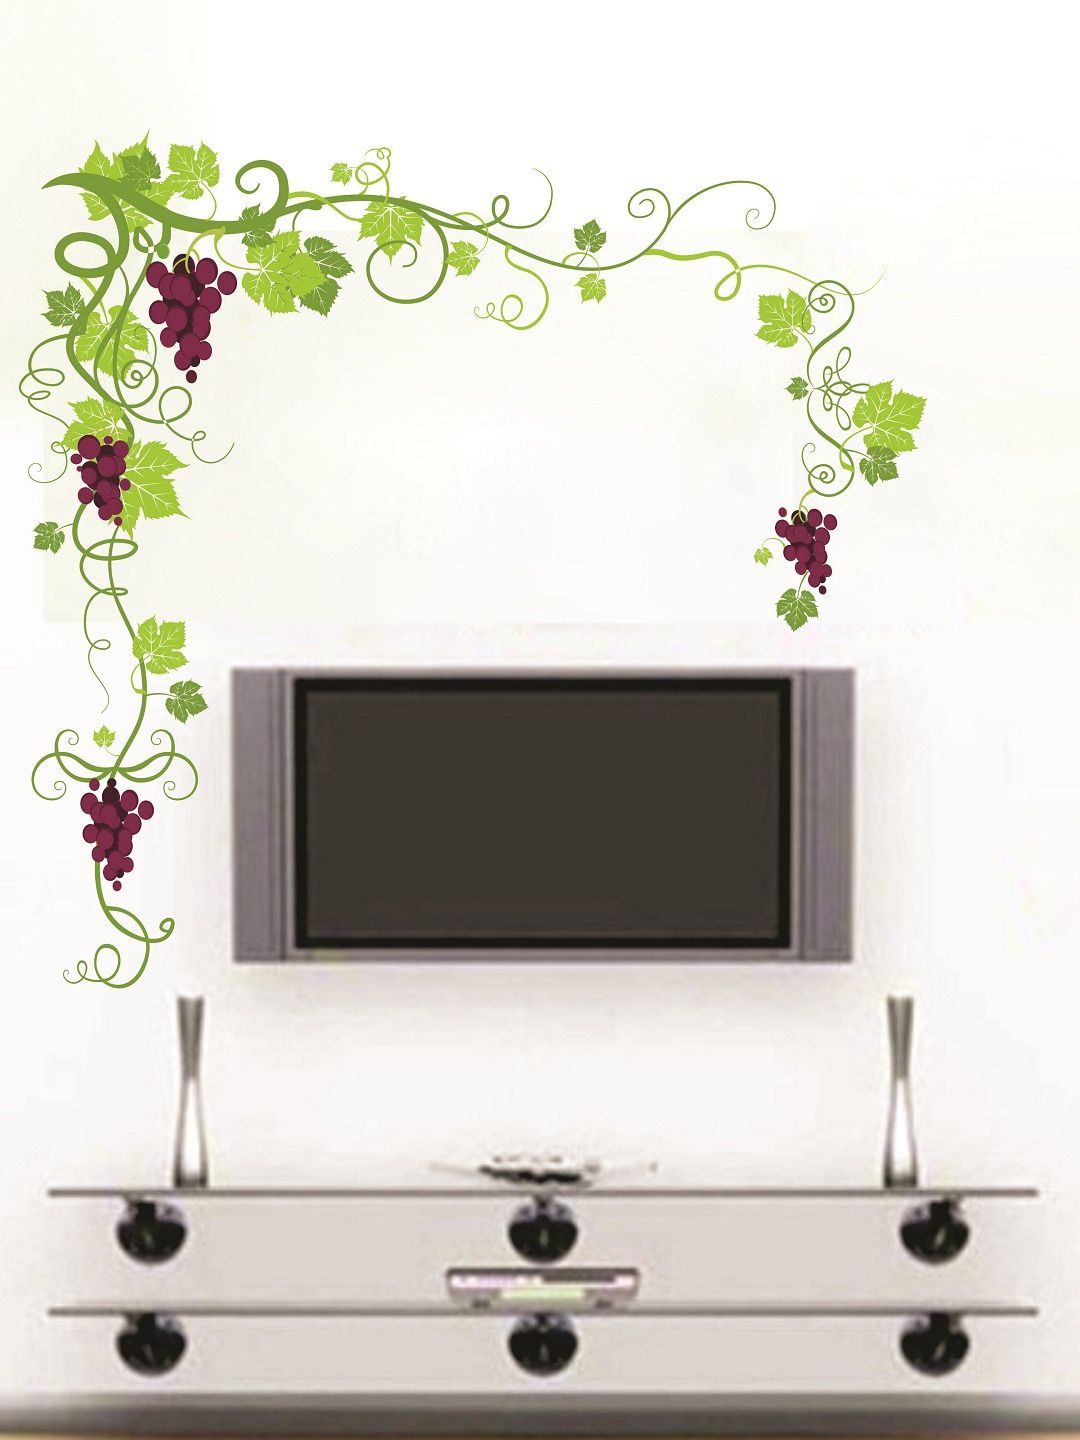 WALLSTICK Green & Burgundy Leave Creepers Large Vinyl Wall Sticker Price in India